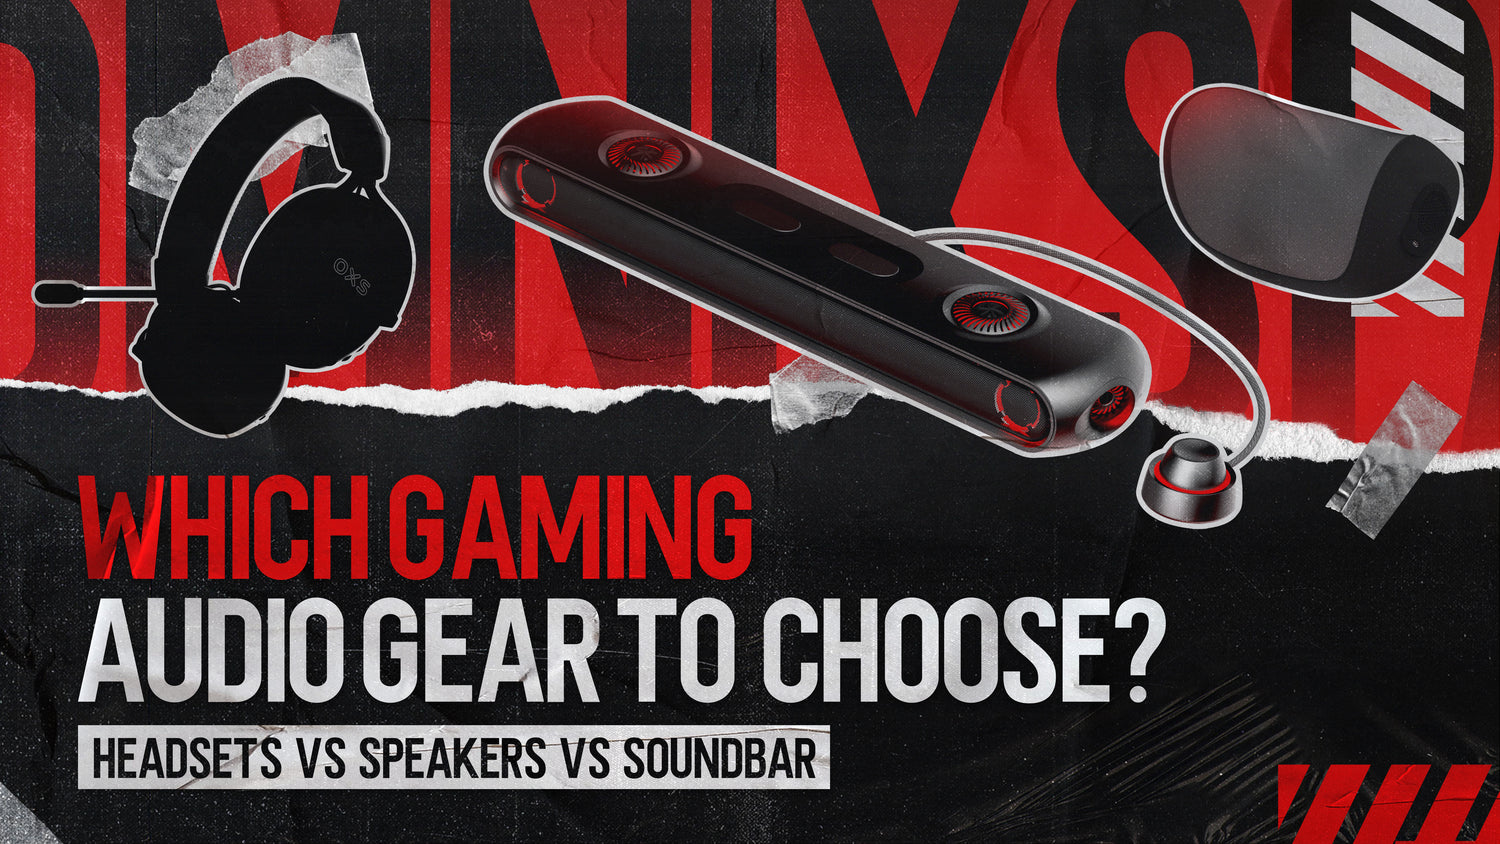 Headsets VS Speakers VS Soundbars: Which One to Choose for Gaming